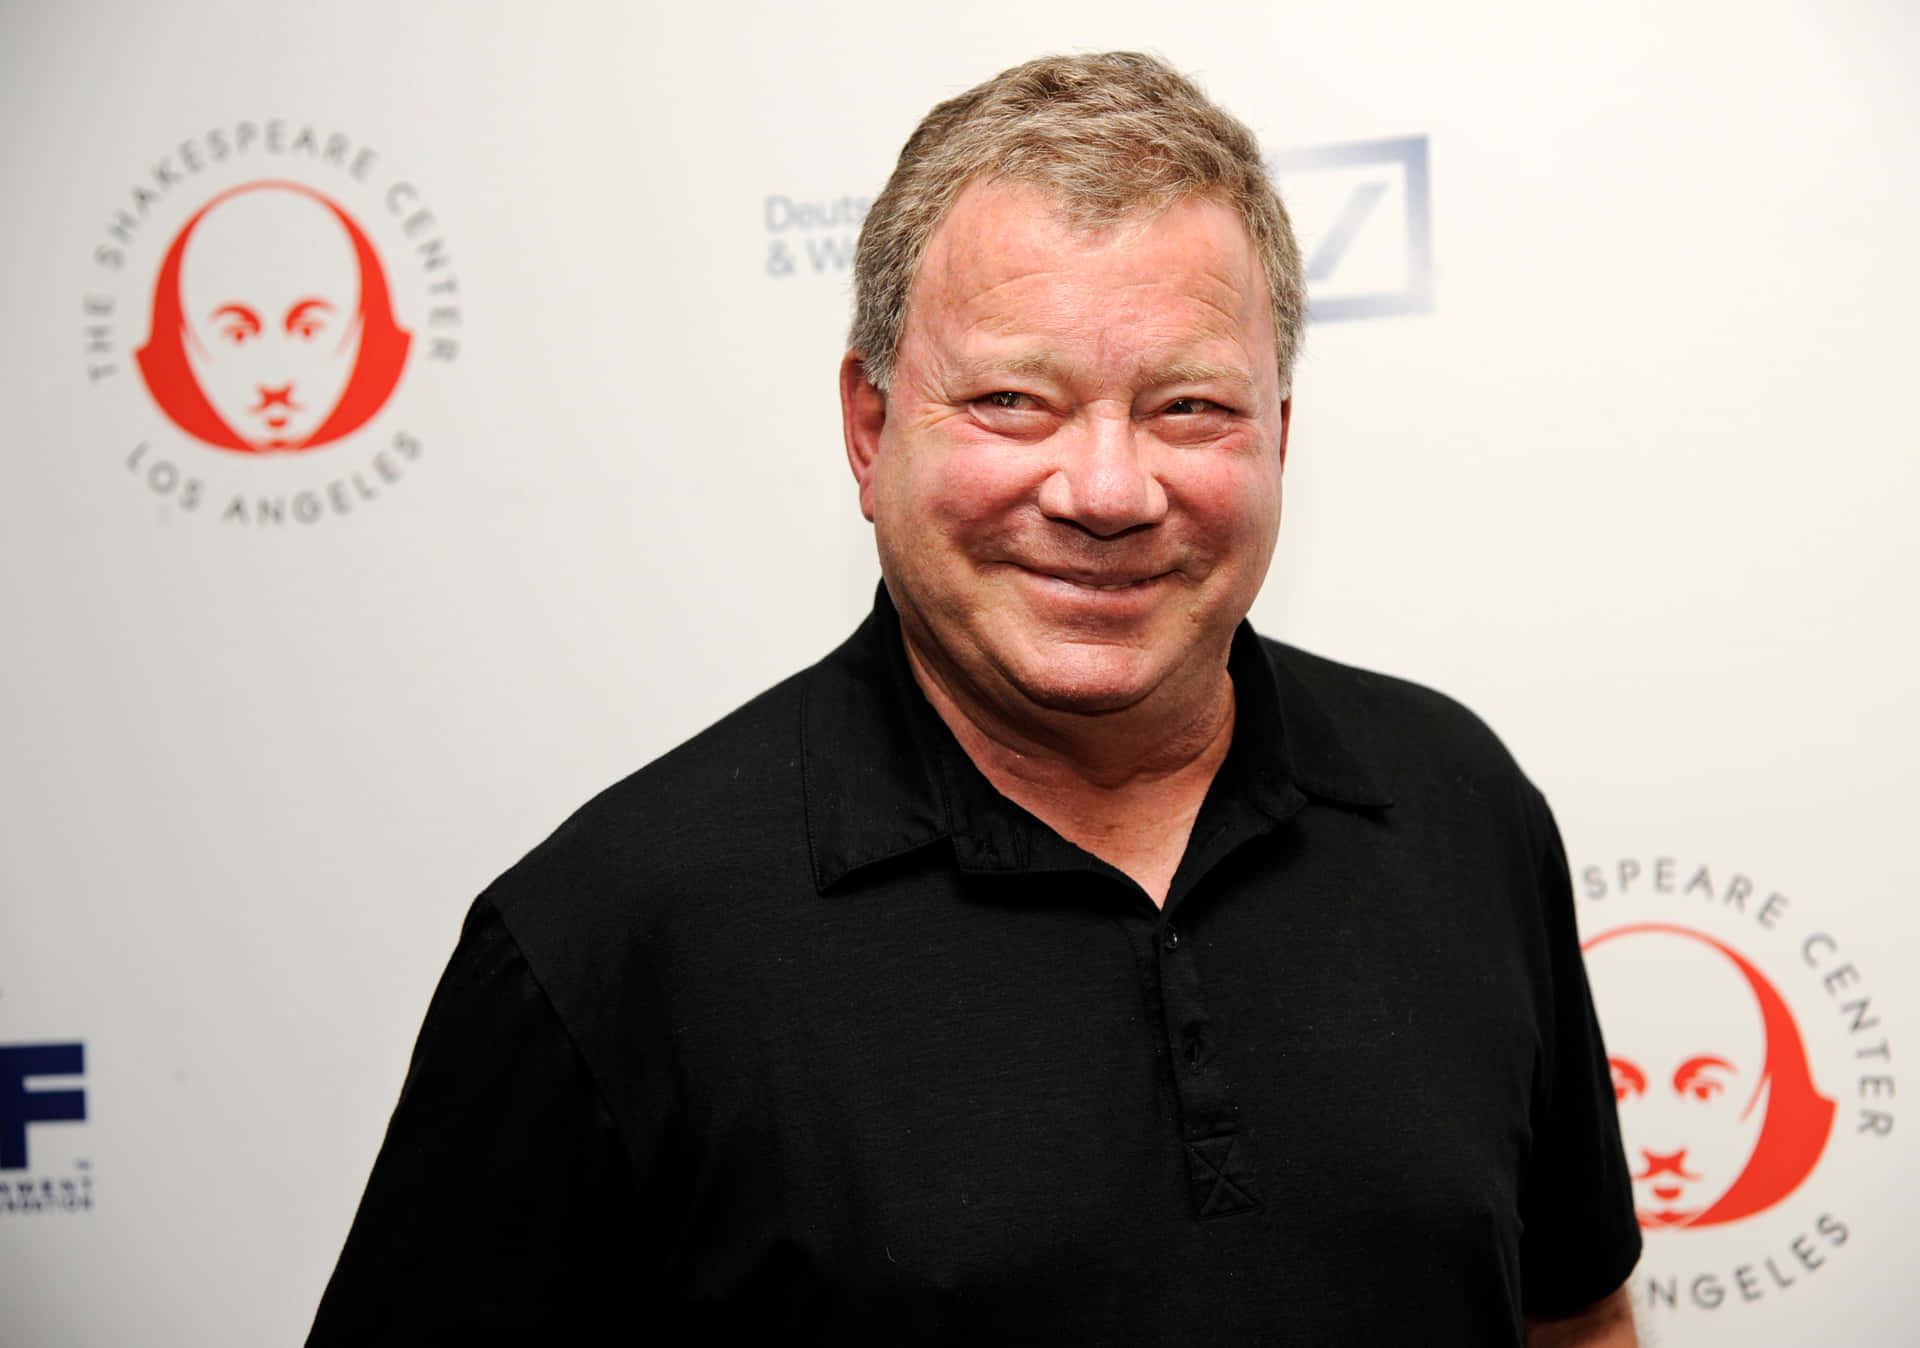 William Shatner Smiling In A Black Suit With A Blue Shirt